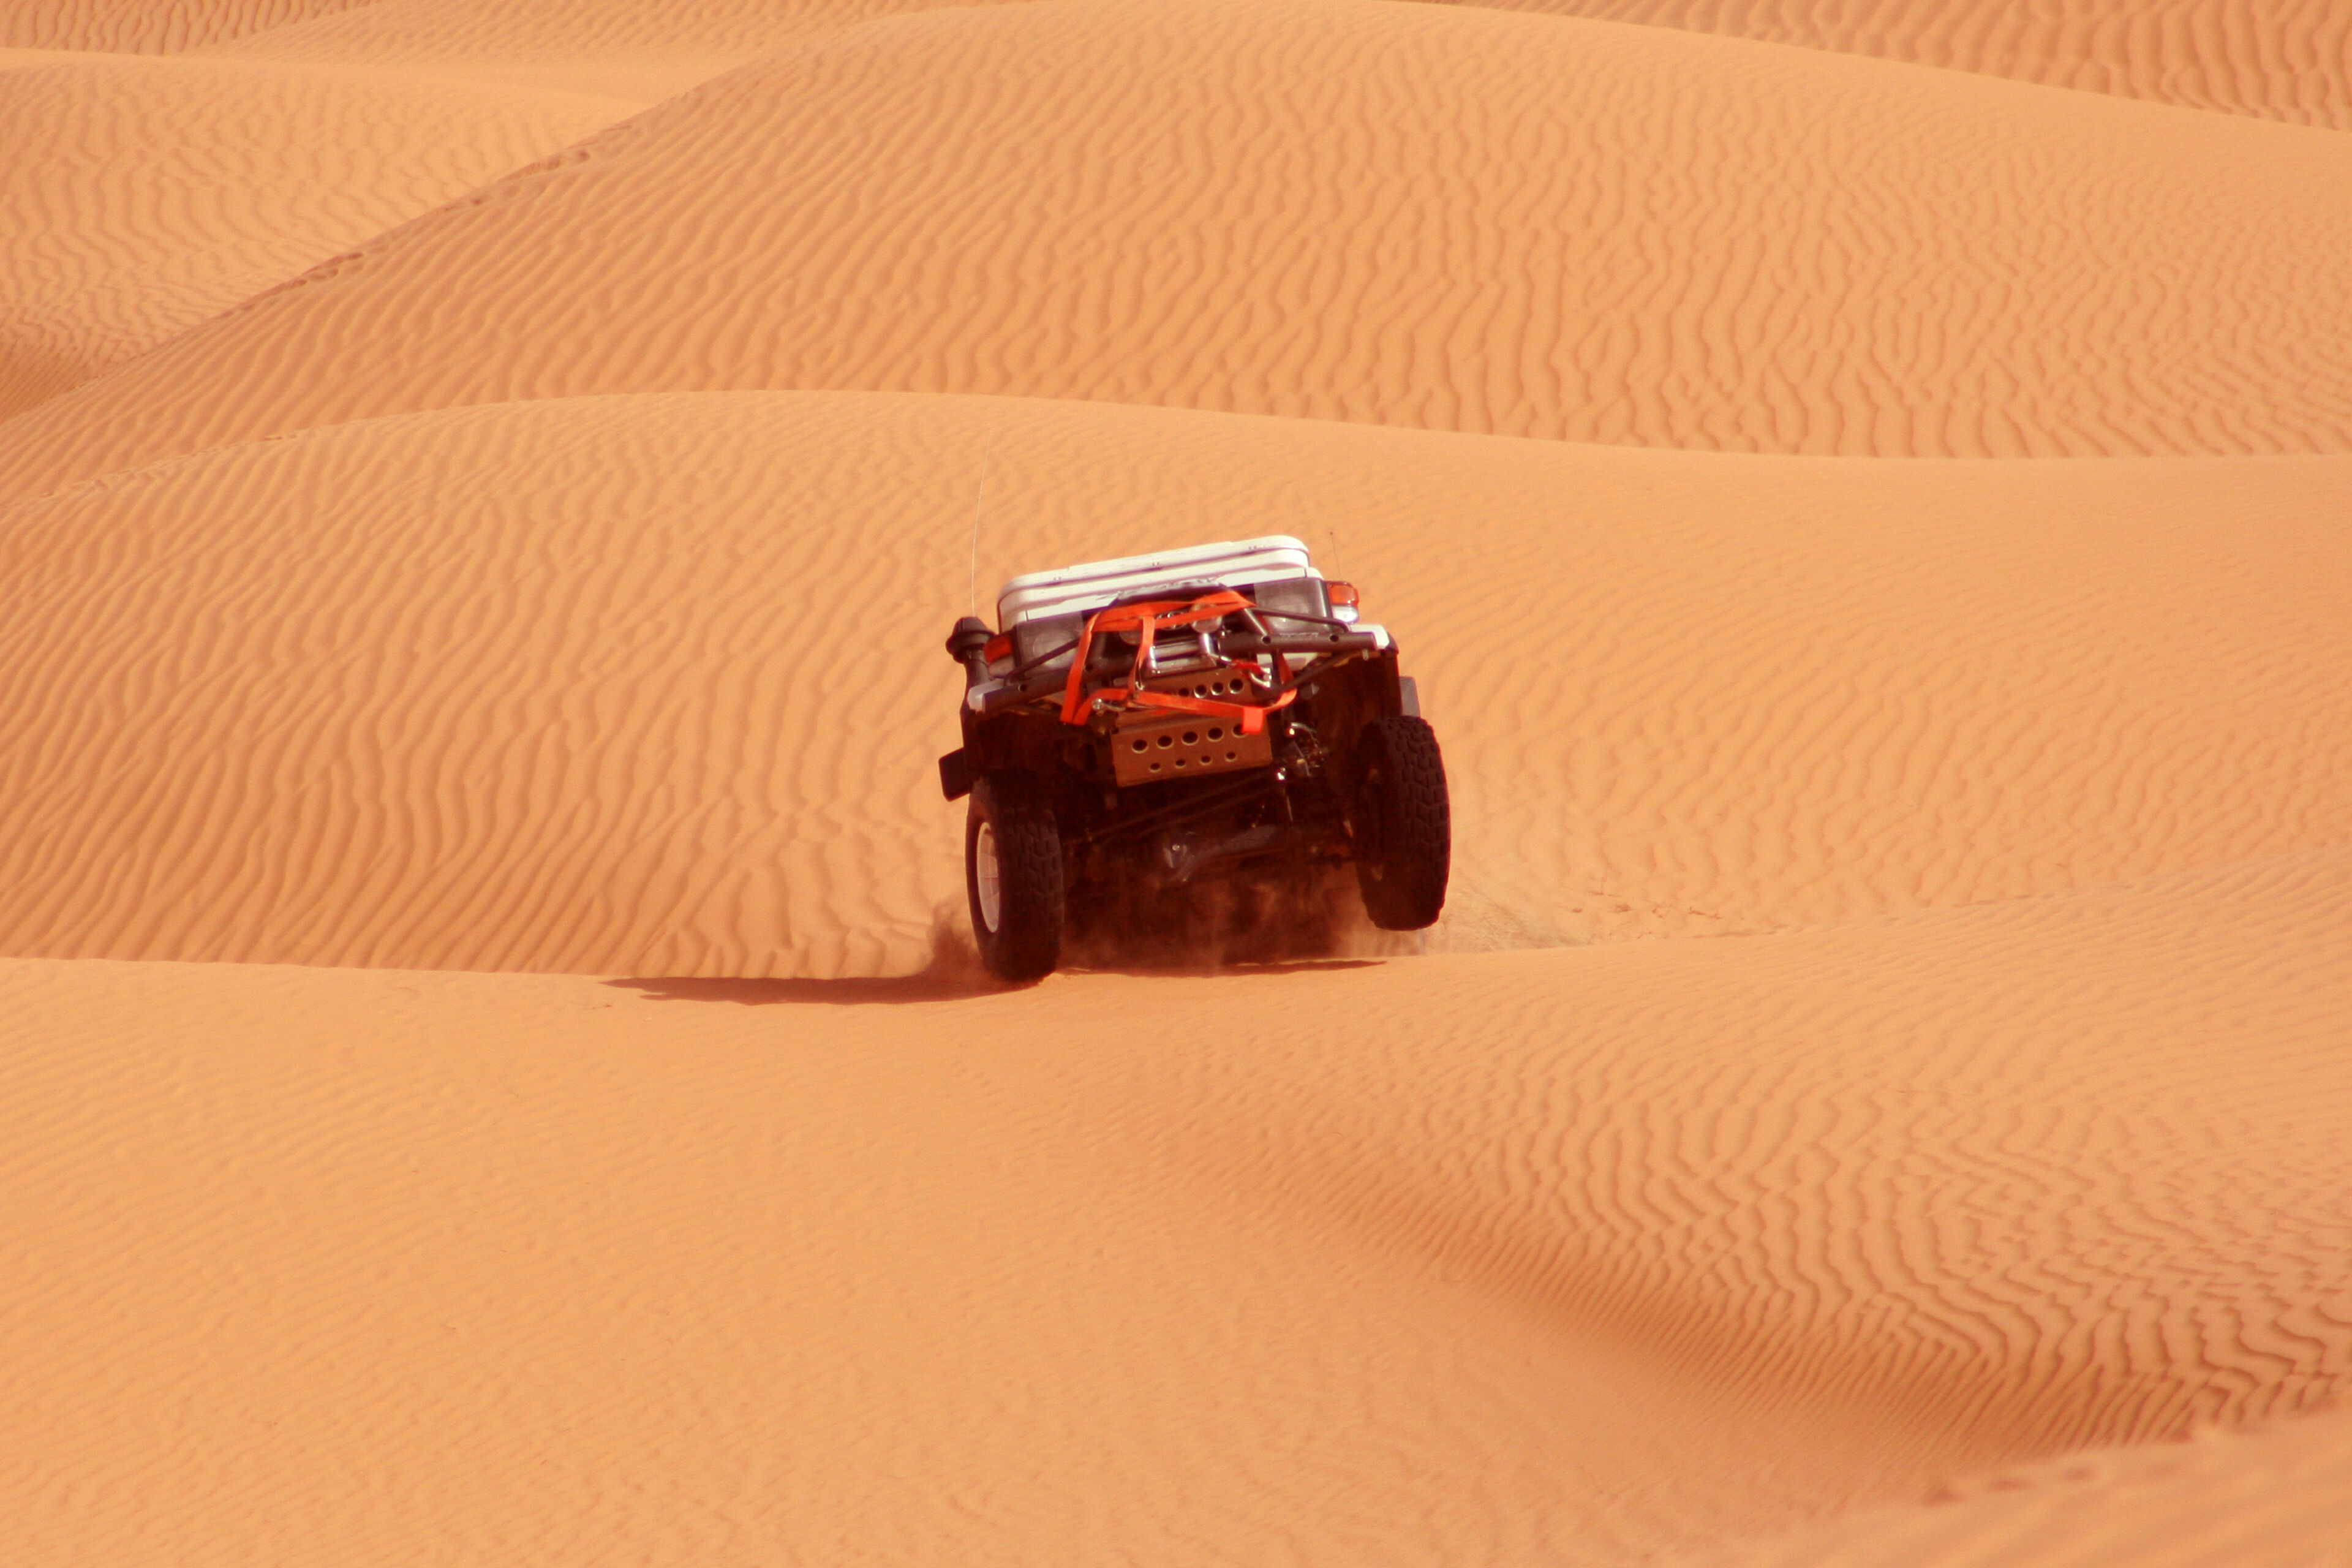 A powerful off-road vehicle conquers the desert, leaving a trail on the soft dunes under the bright sun.